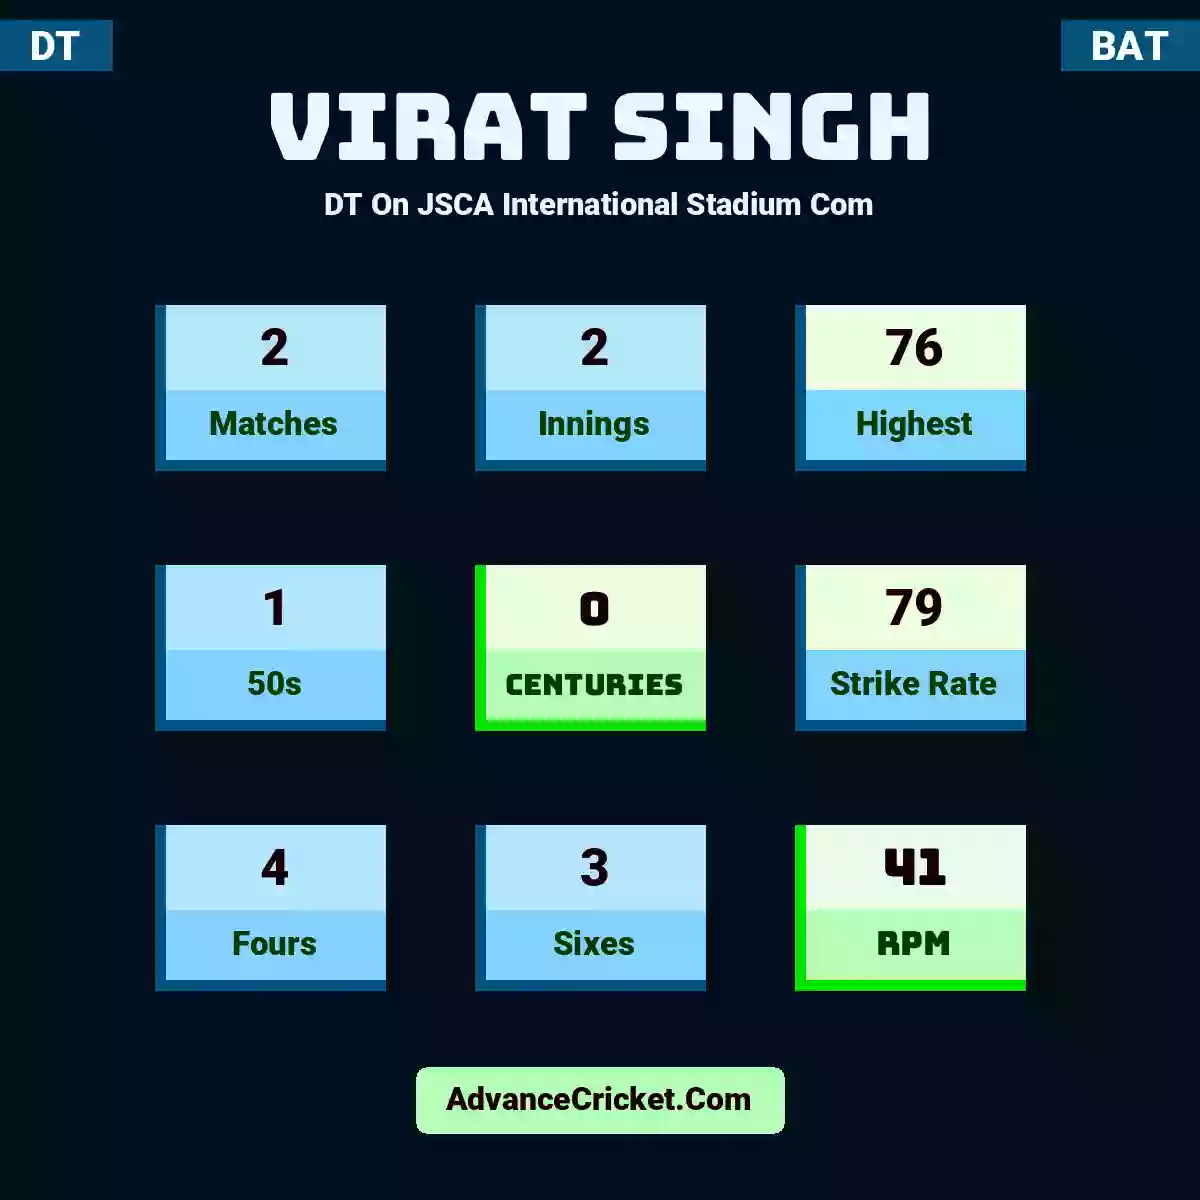 Virat Singh DT  On JSCA International Stadium Com, Virat Singh played 2 matches, scored 76 runs as highest, 1 half-centuries, and 0 centuries, with a strike rate of 79. V.Singh hit 4 fours and 3 sixes, with an RPM of 41.